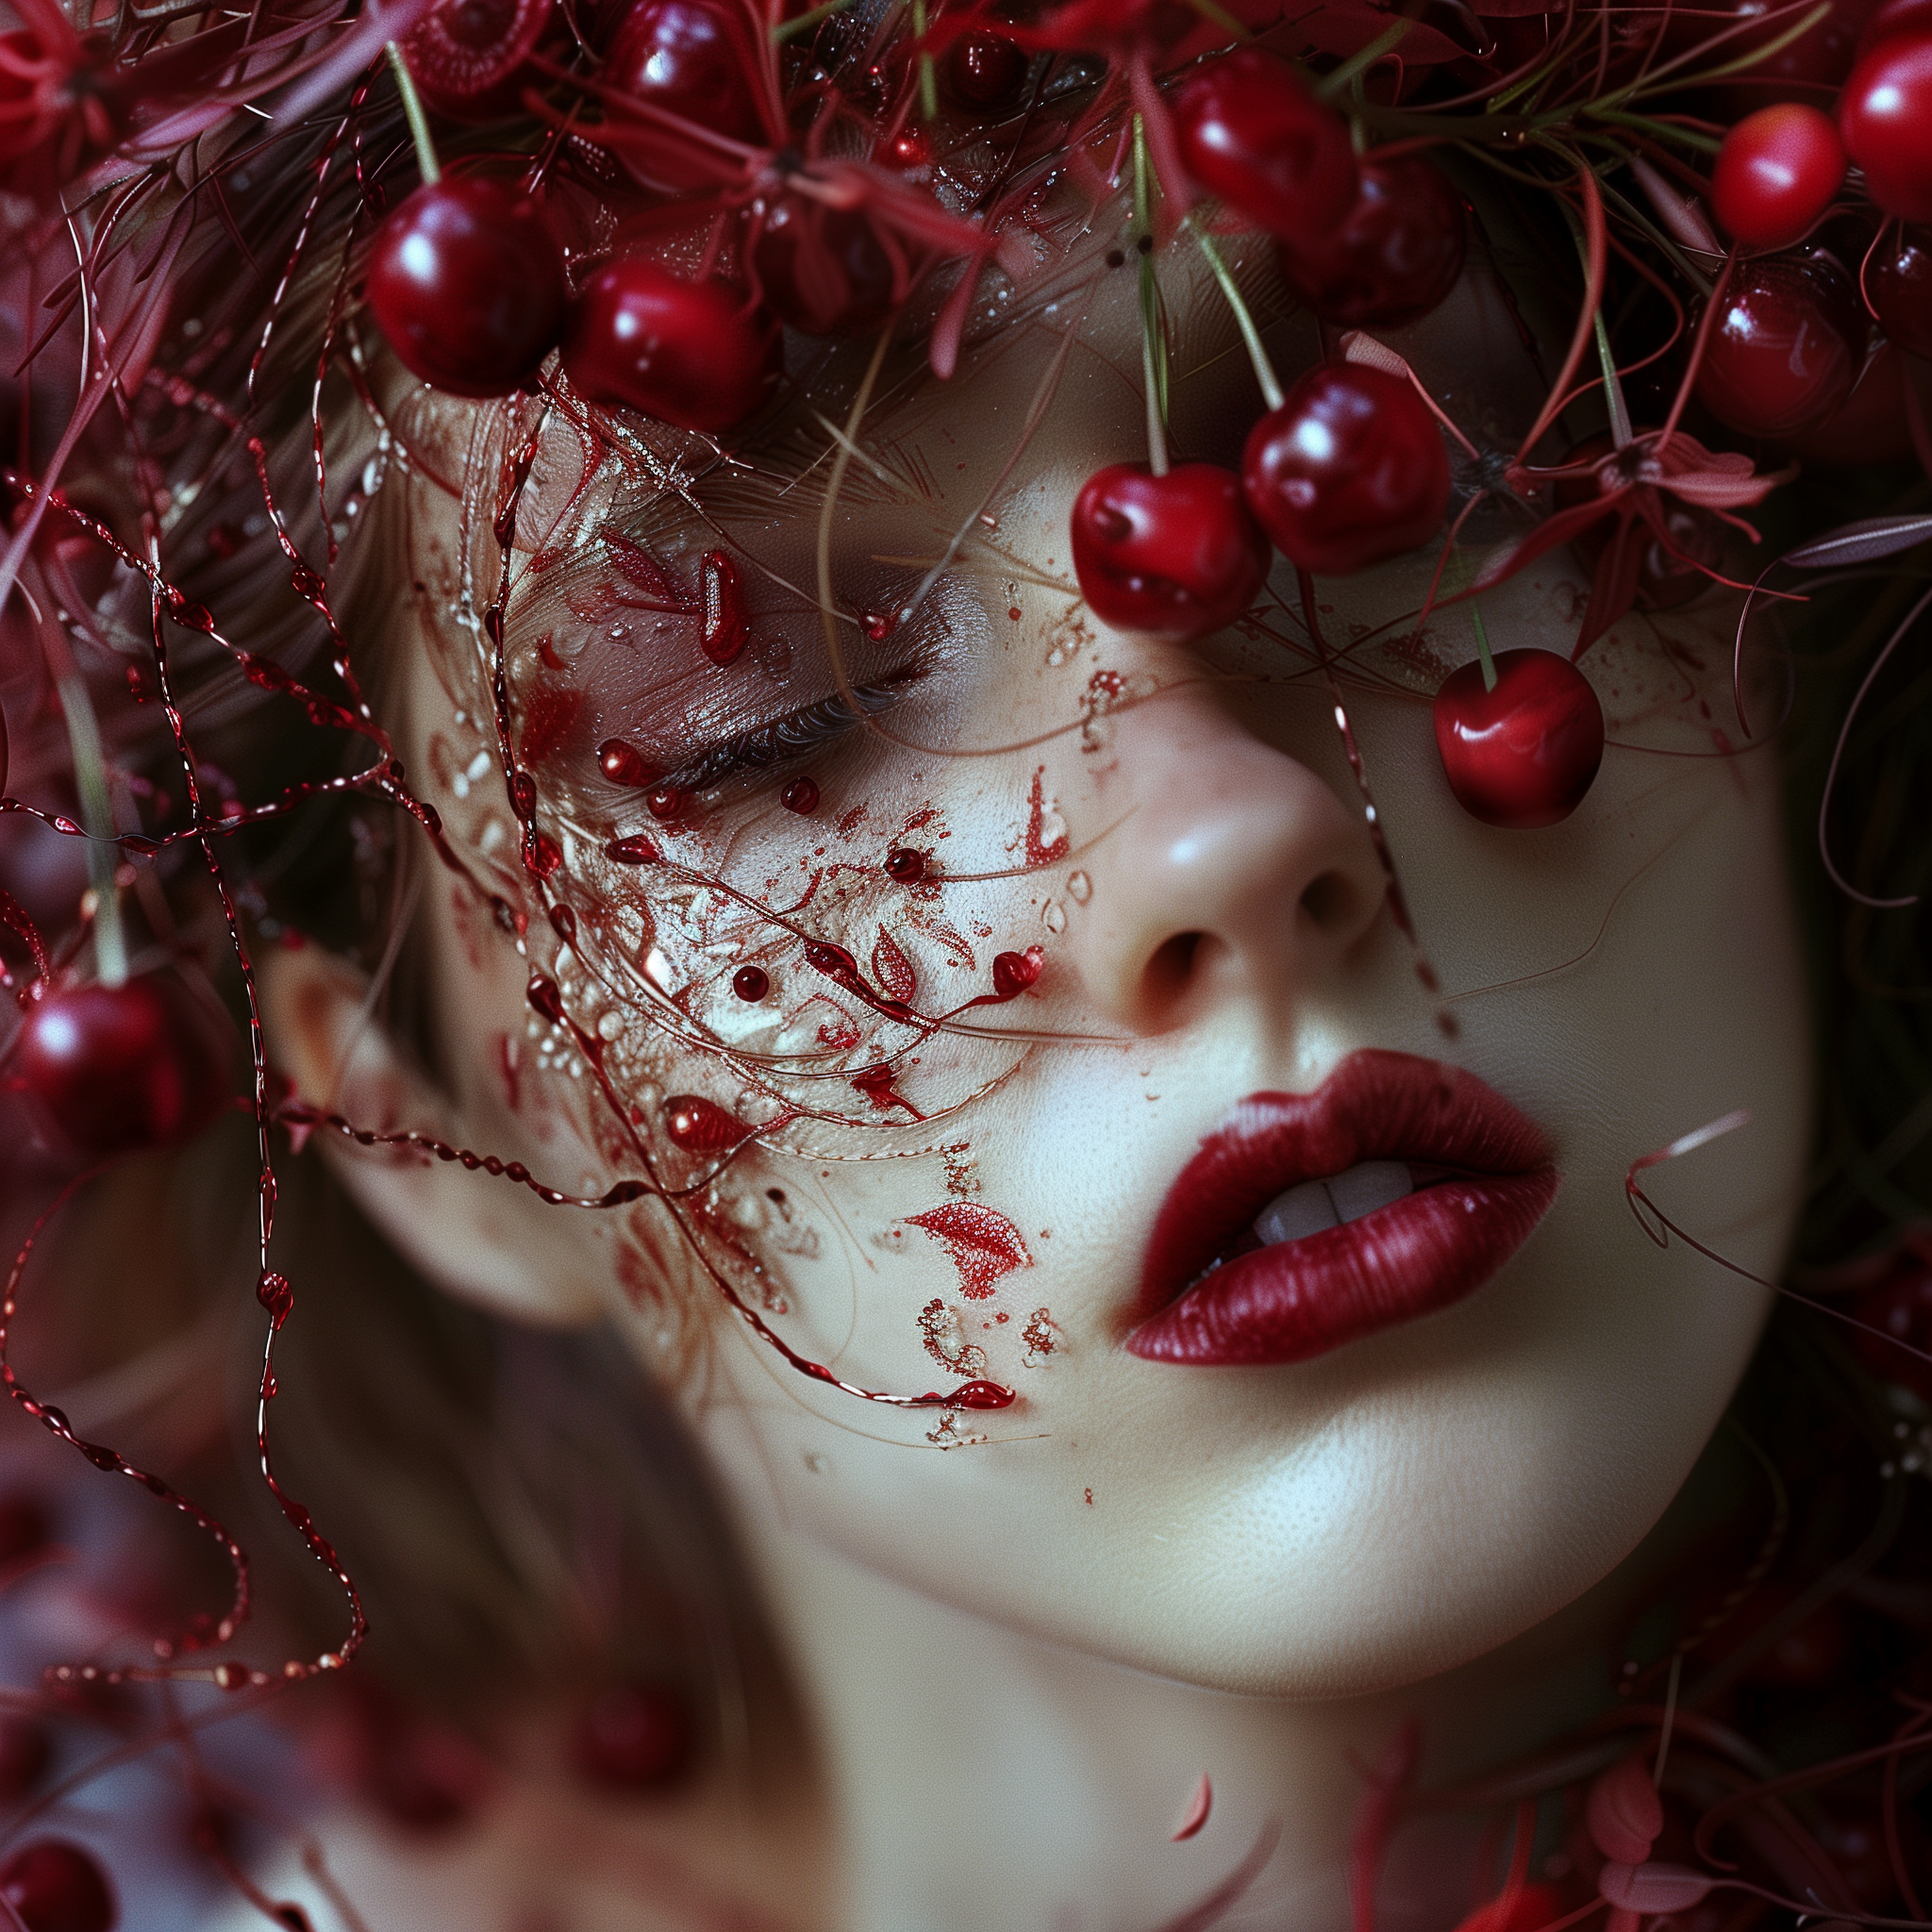 Close-up avatar of a woman with cherries adorning her hair and face, artistic profile picture with a focus on red tones.